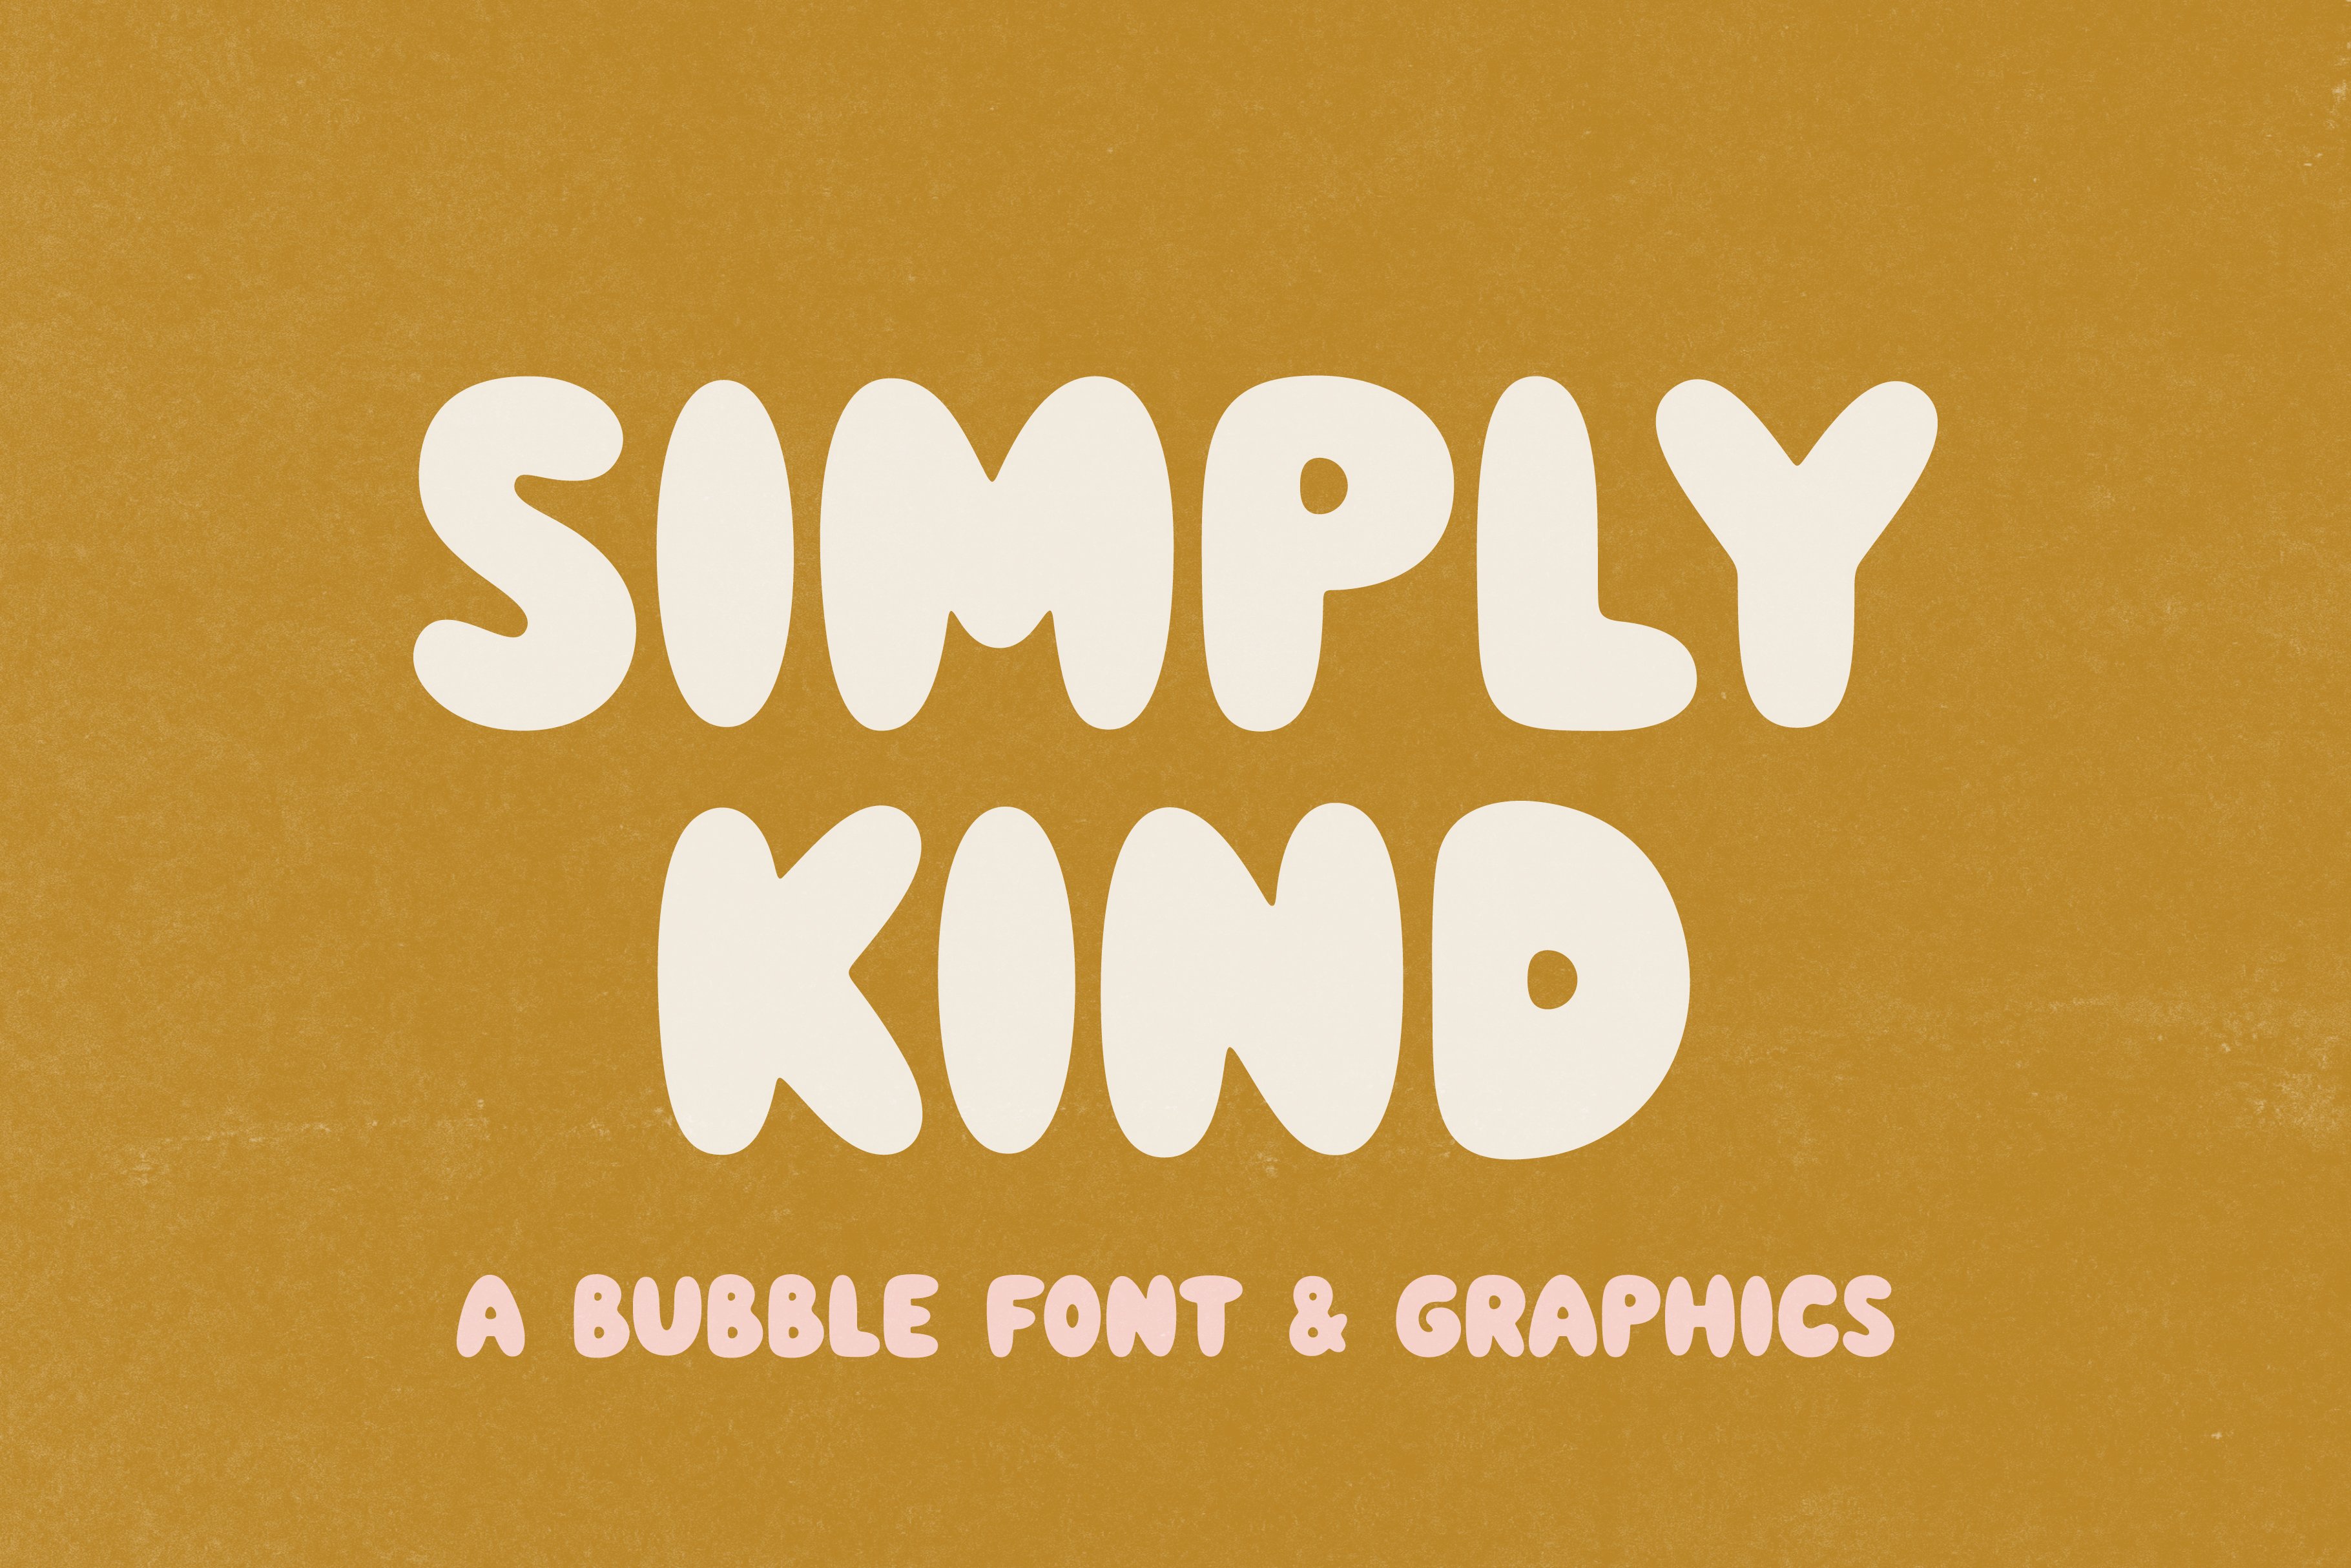 Simply Kind - Bubble Font cover image.